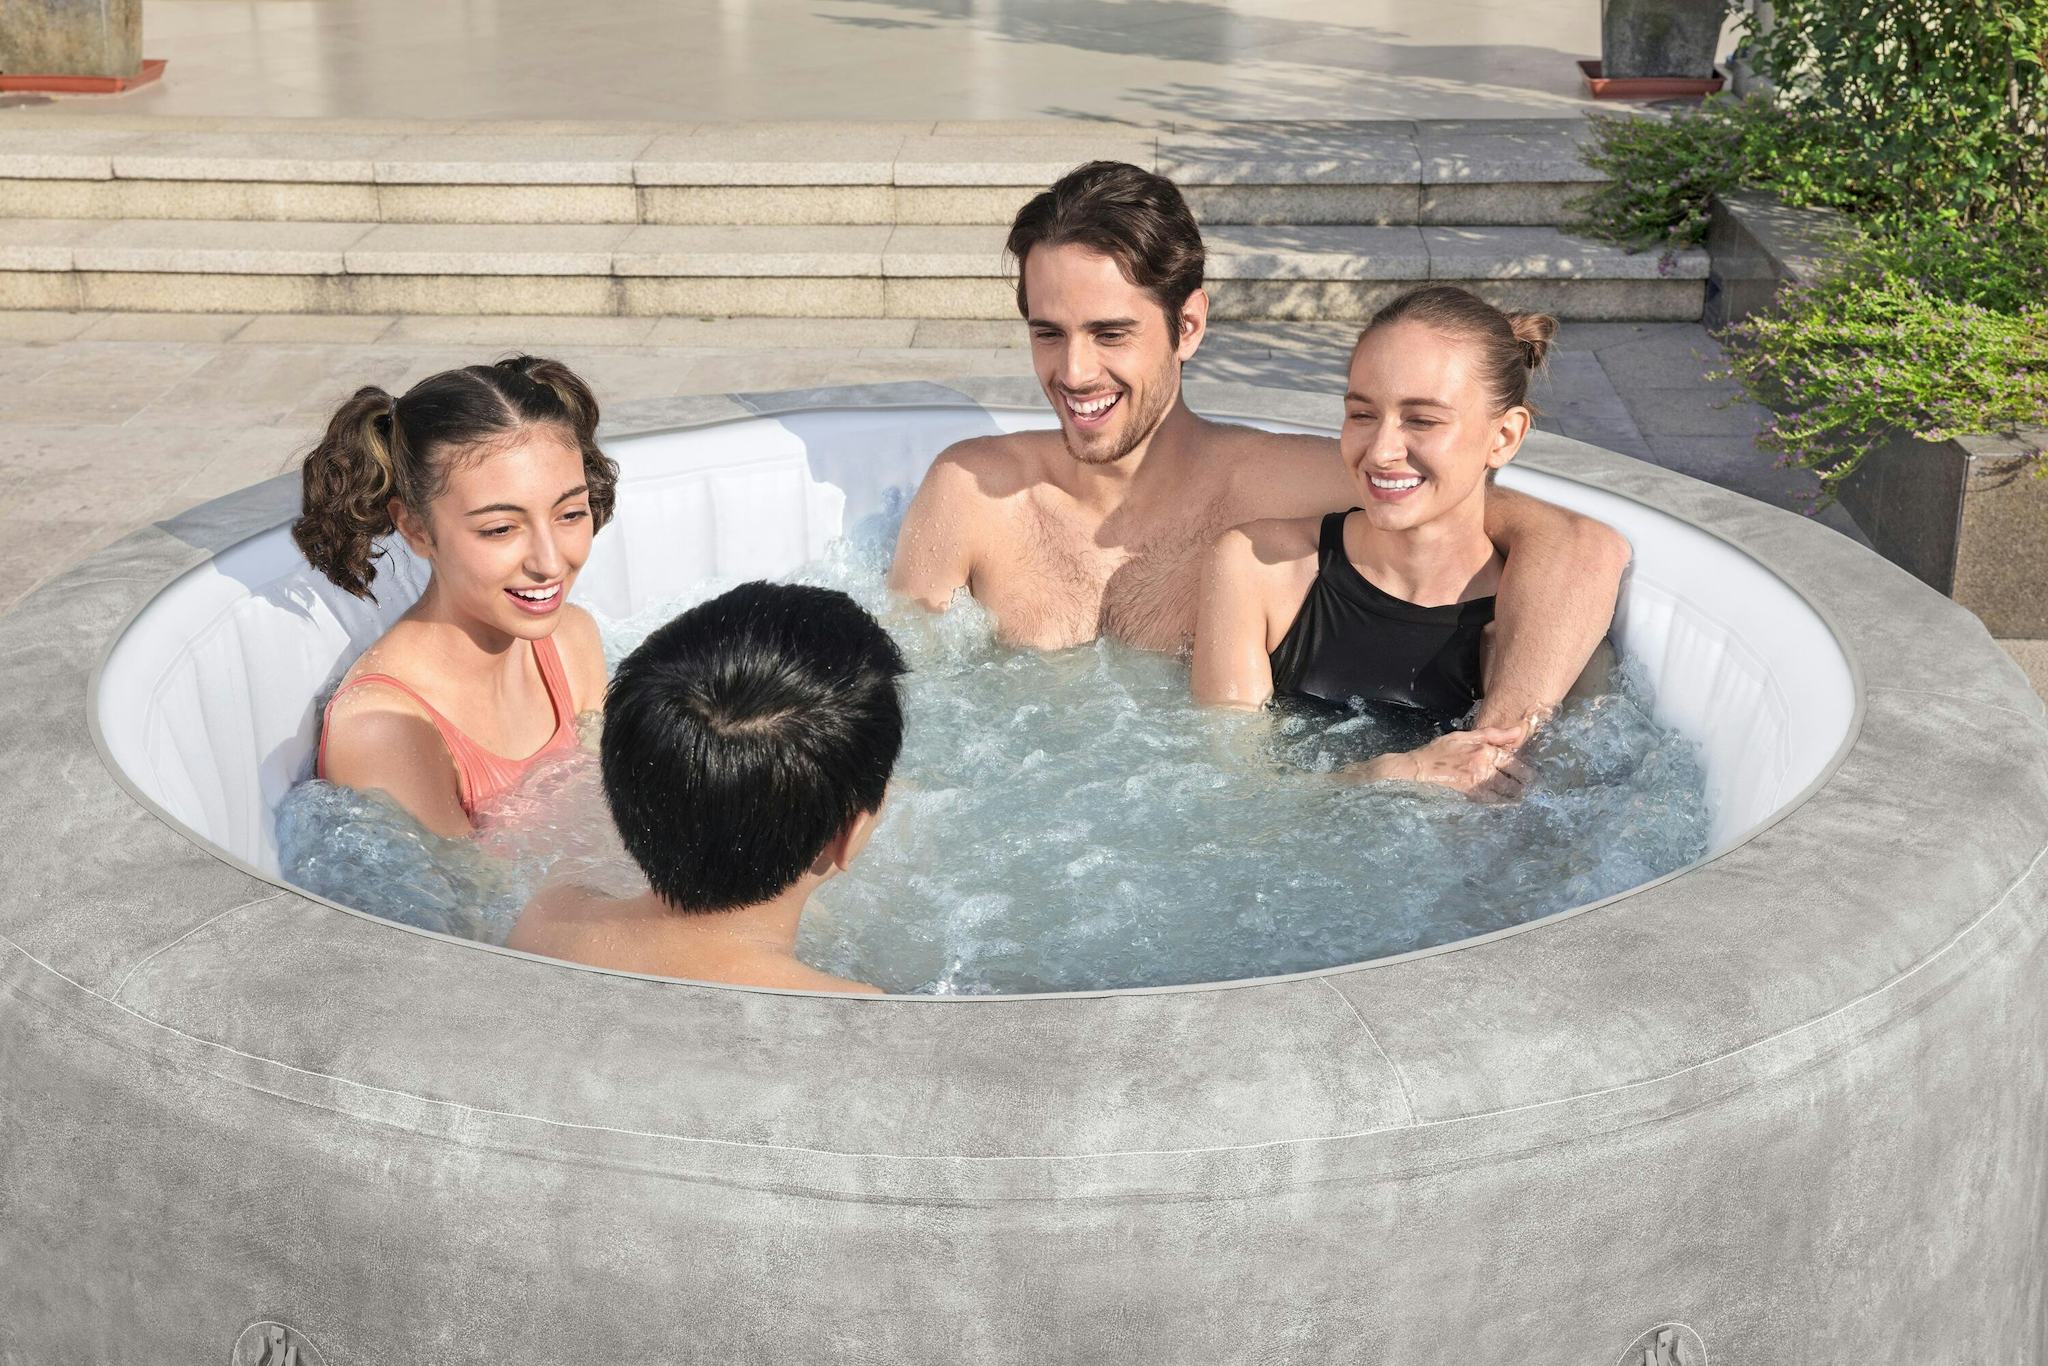 Spas Gonflables Spa gonflable rond Lay-Z-Spa Zurich Airjet™ 2 - 4 personnes Bestway 15